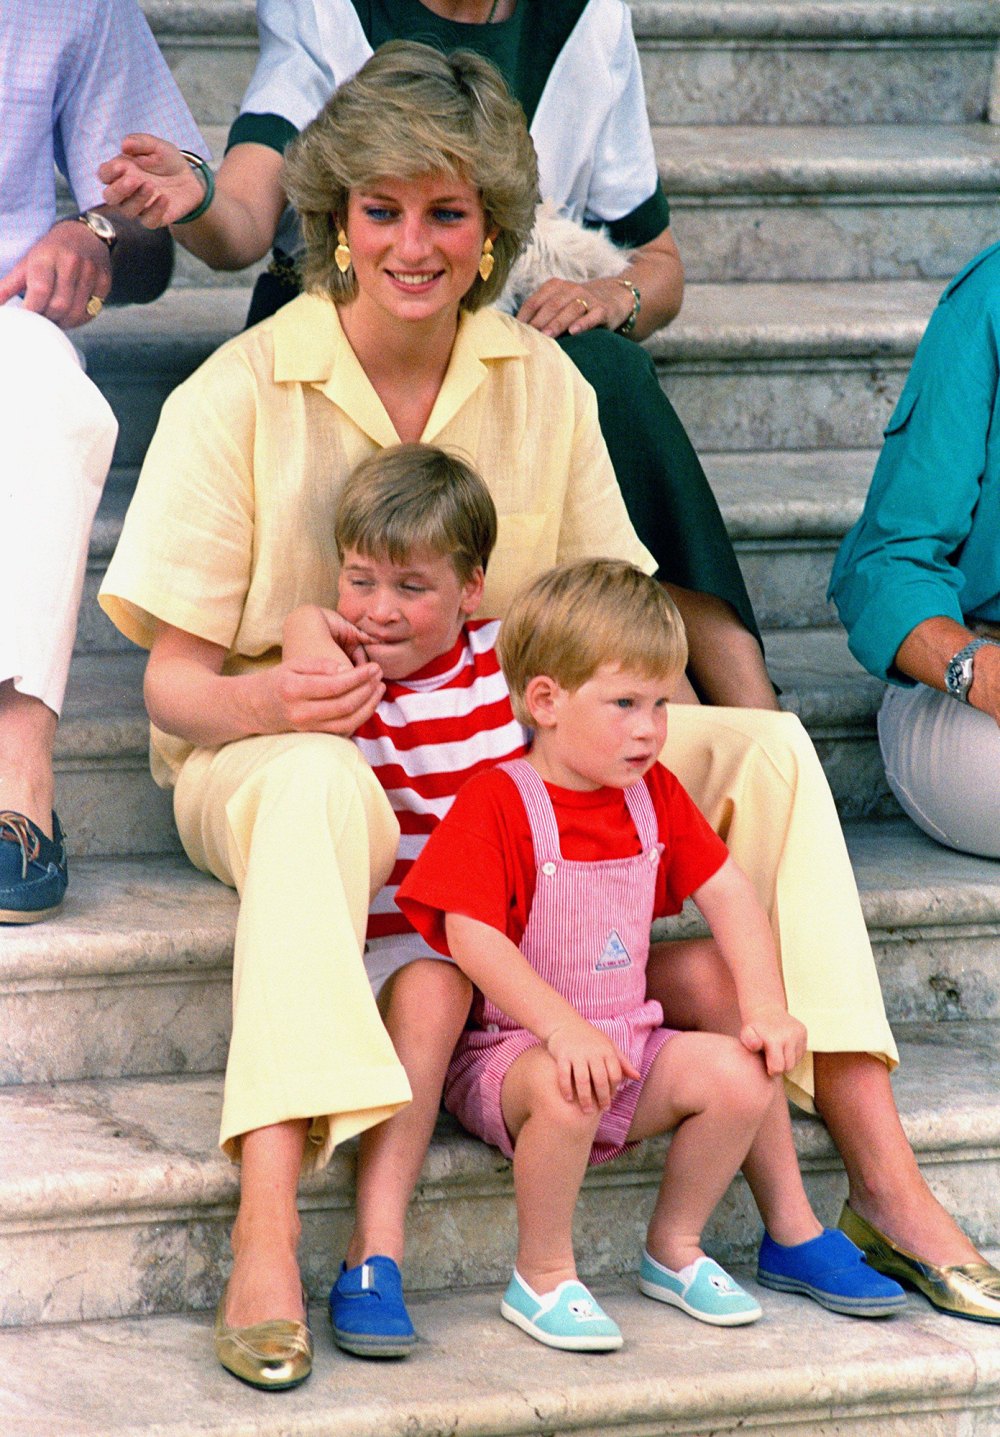 Prince Harry Thinks Late Mom Princess Diana Would Be 'Sad' Over Rift With Prince William: I Feel Her 'Presence'